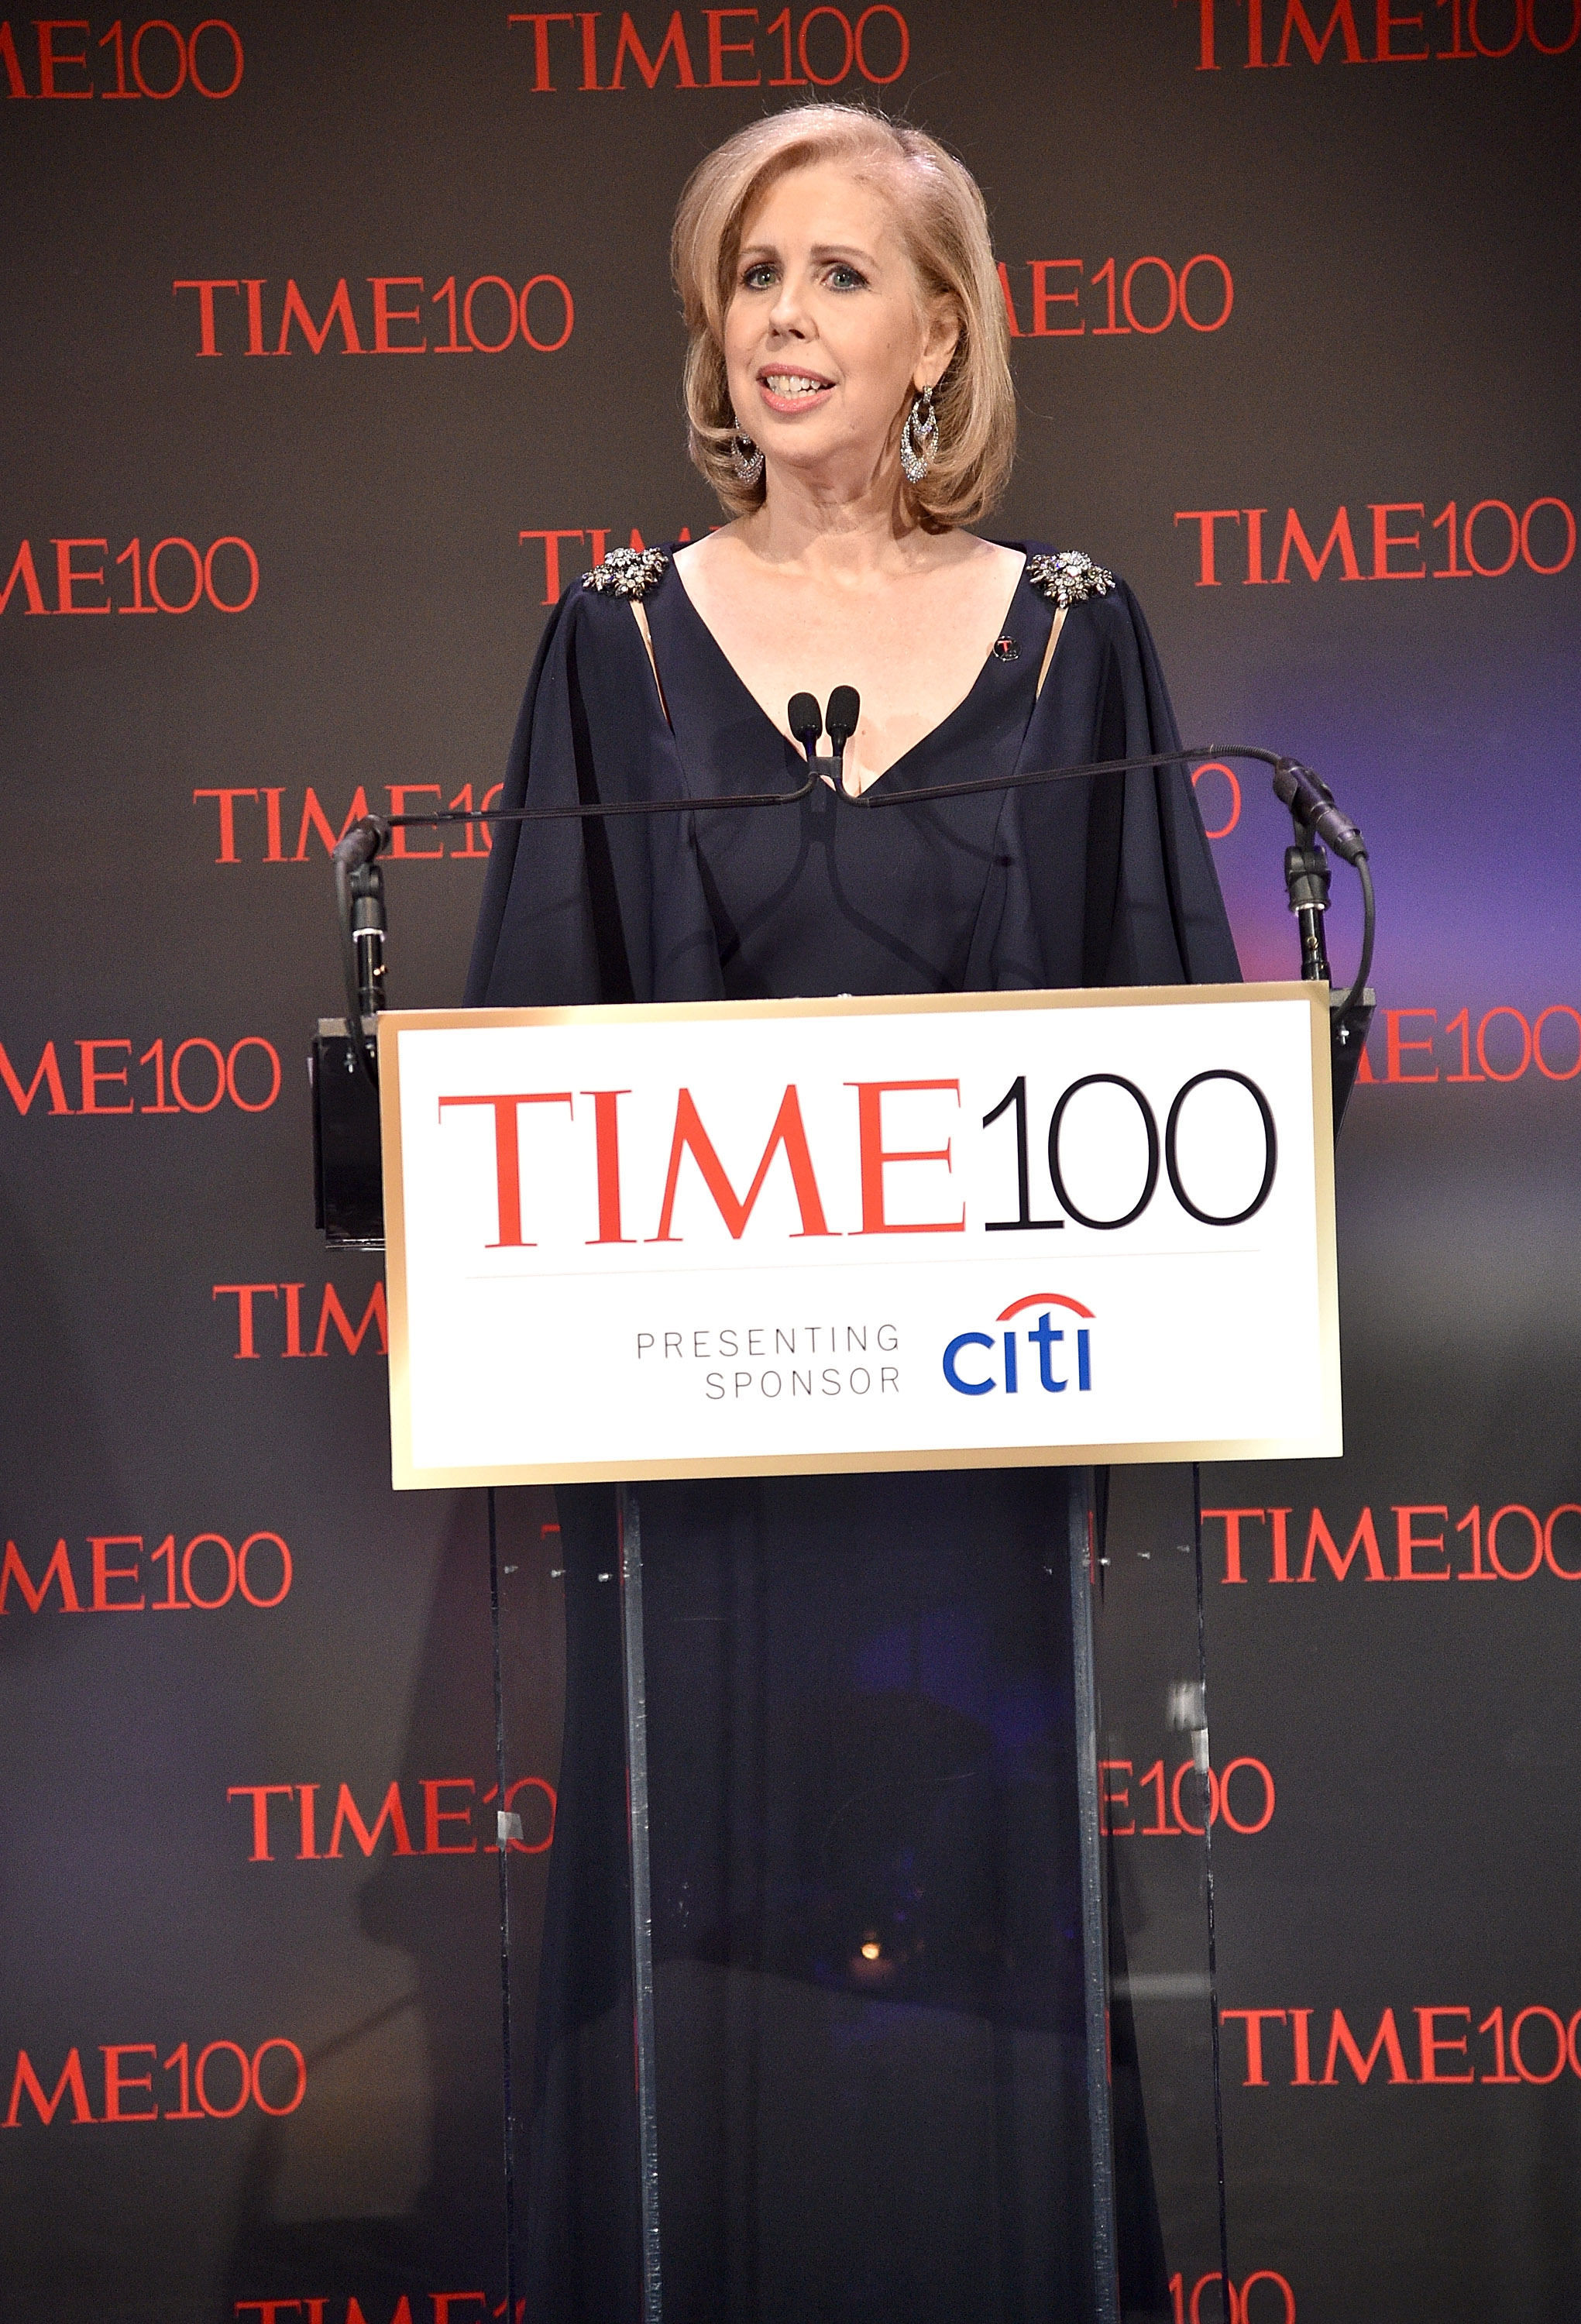 TIME managing editor Nancy Gibbs speaks during 2017 Time 100 Gala at Jazz at Lincoln Center on April 25, 2017 in New York City.